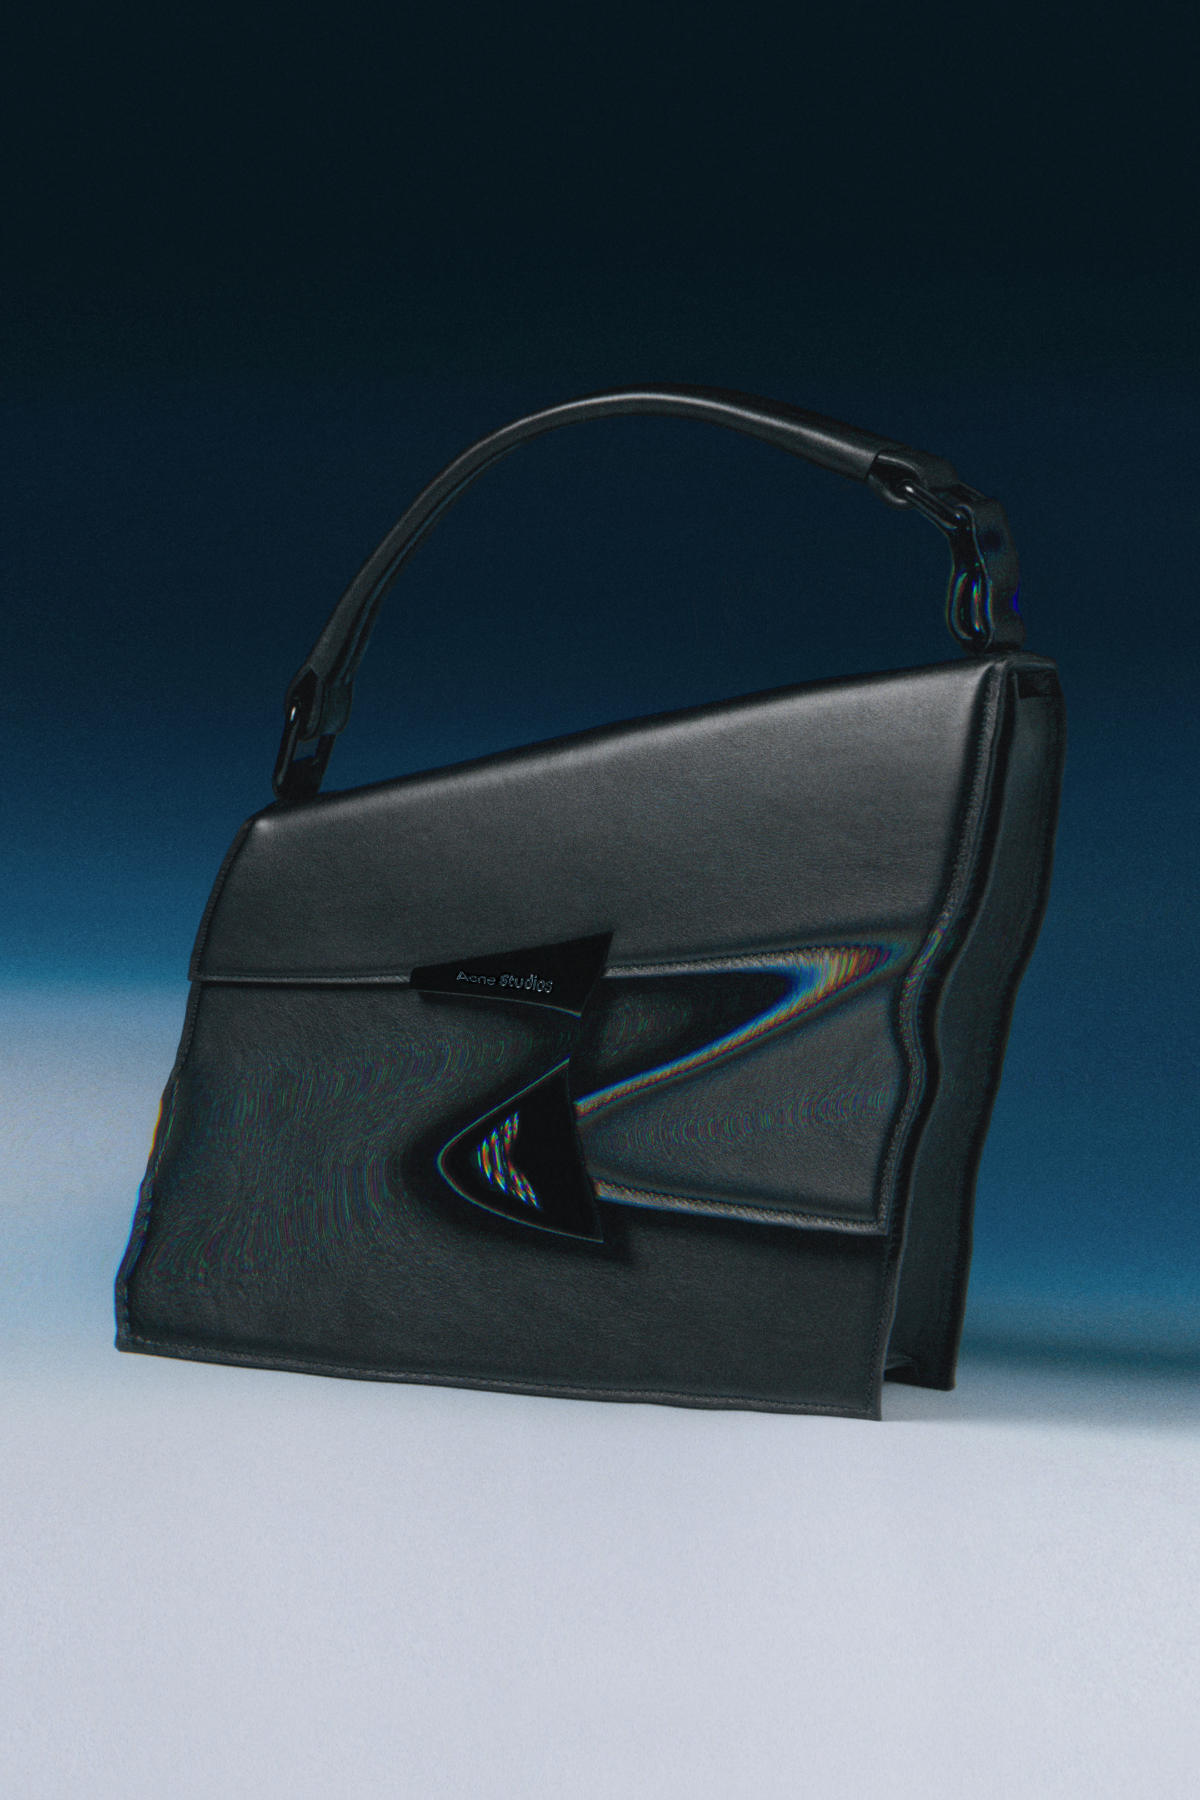 Acne Studio's FW22 Distortion Bag Reimagined In A New Campaign By Keisuke Otobe